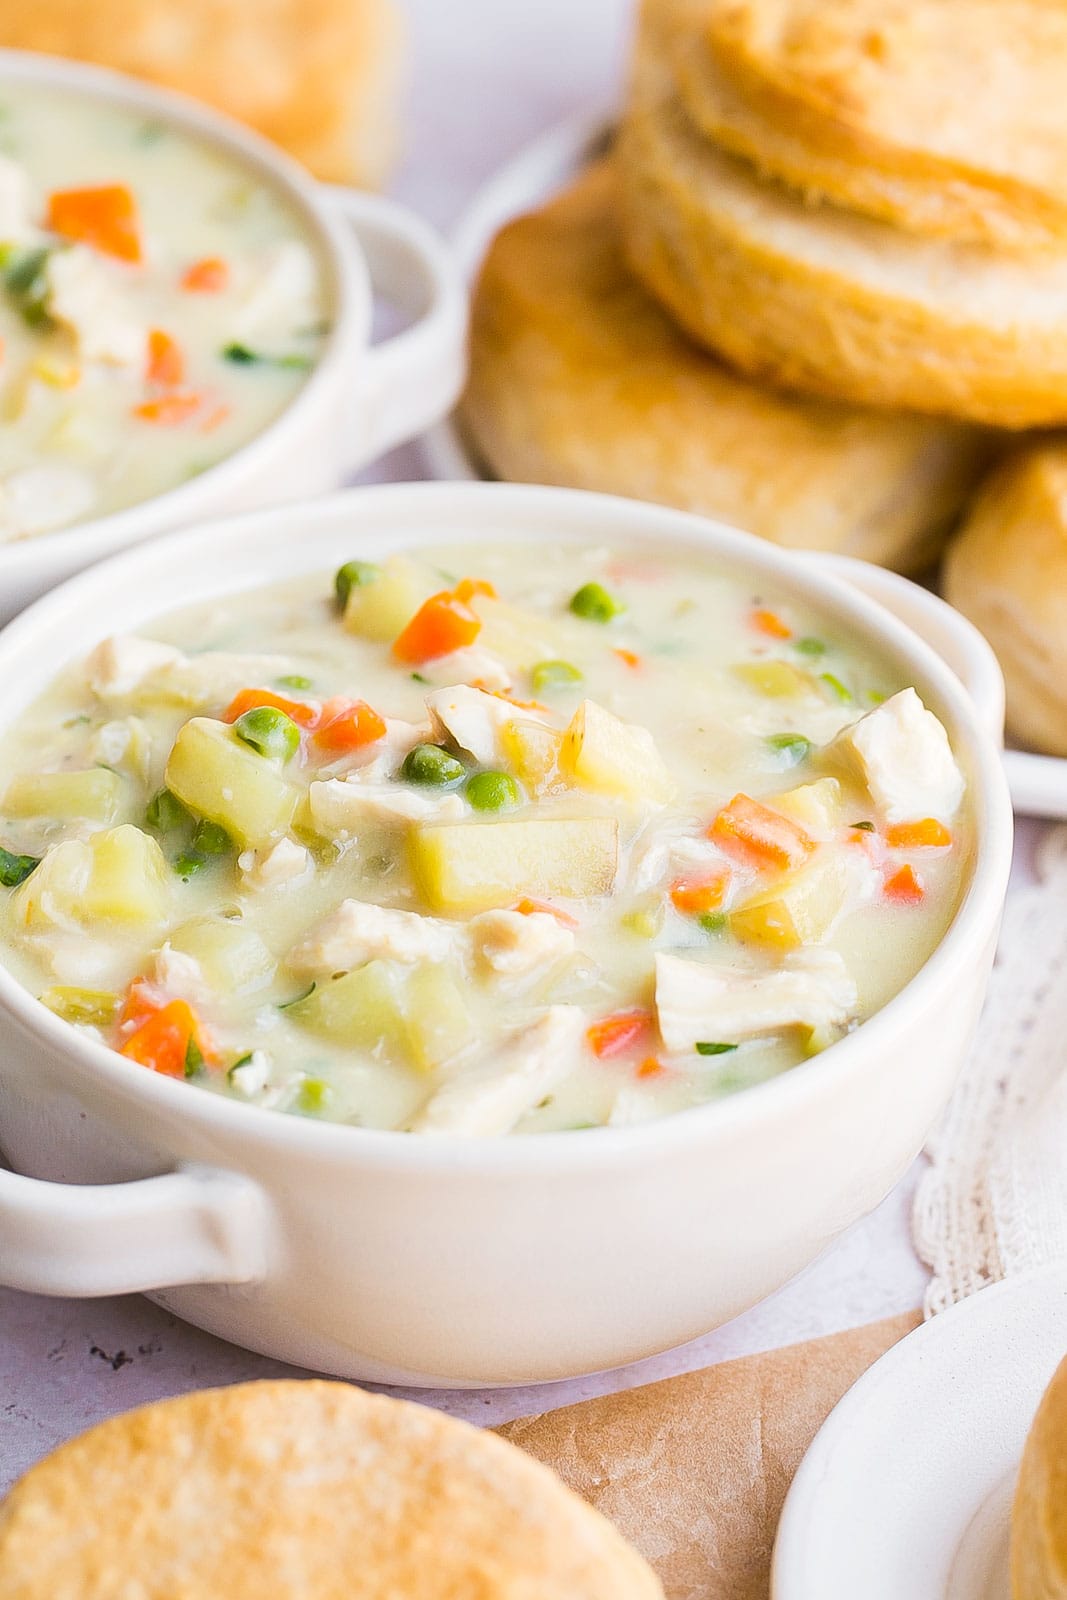 Creamy soup with a side of biscuits.